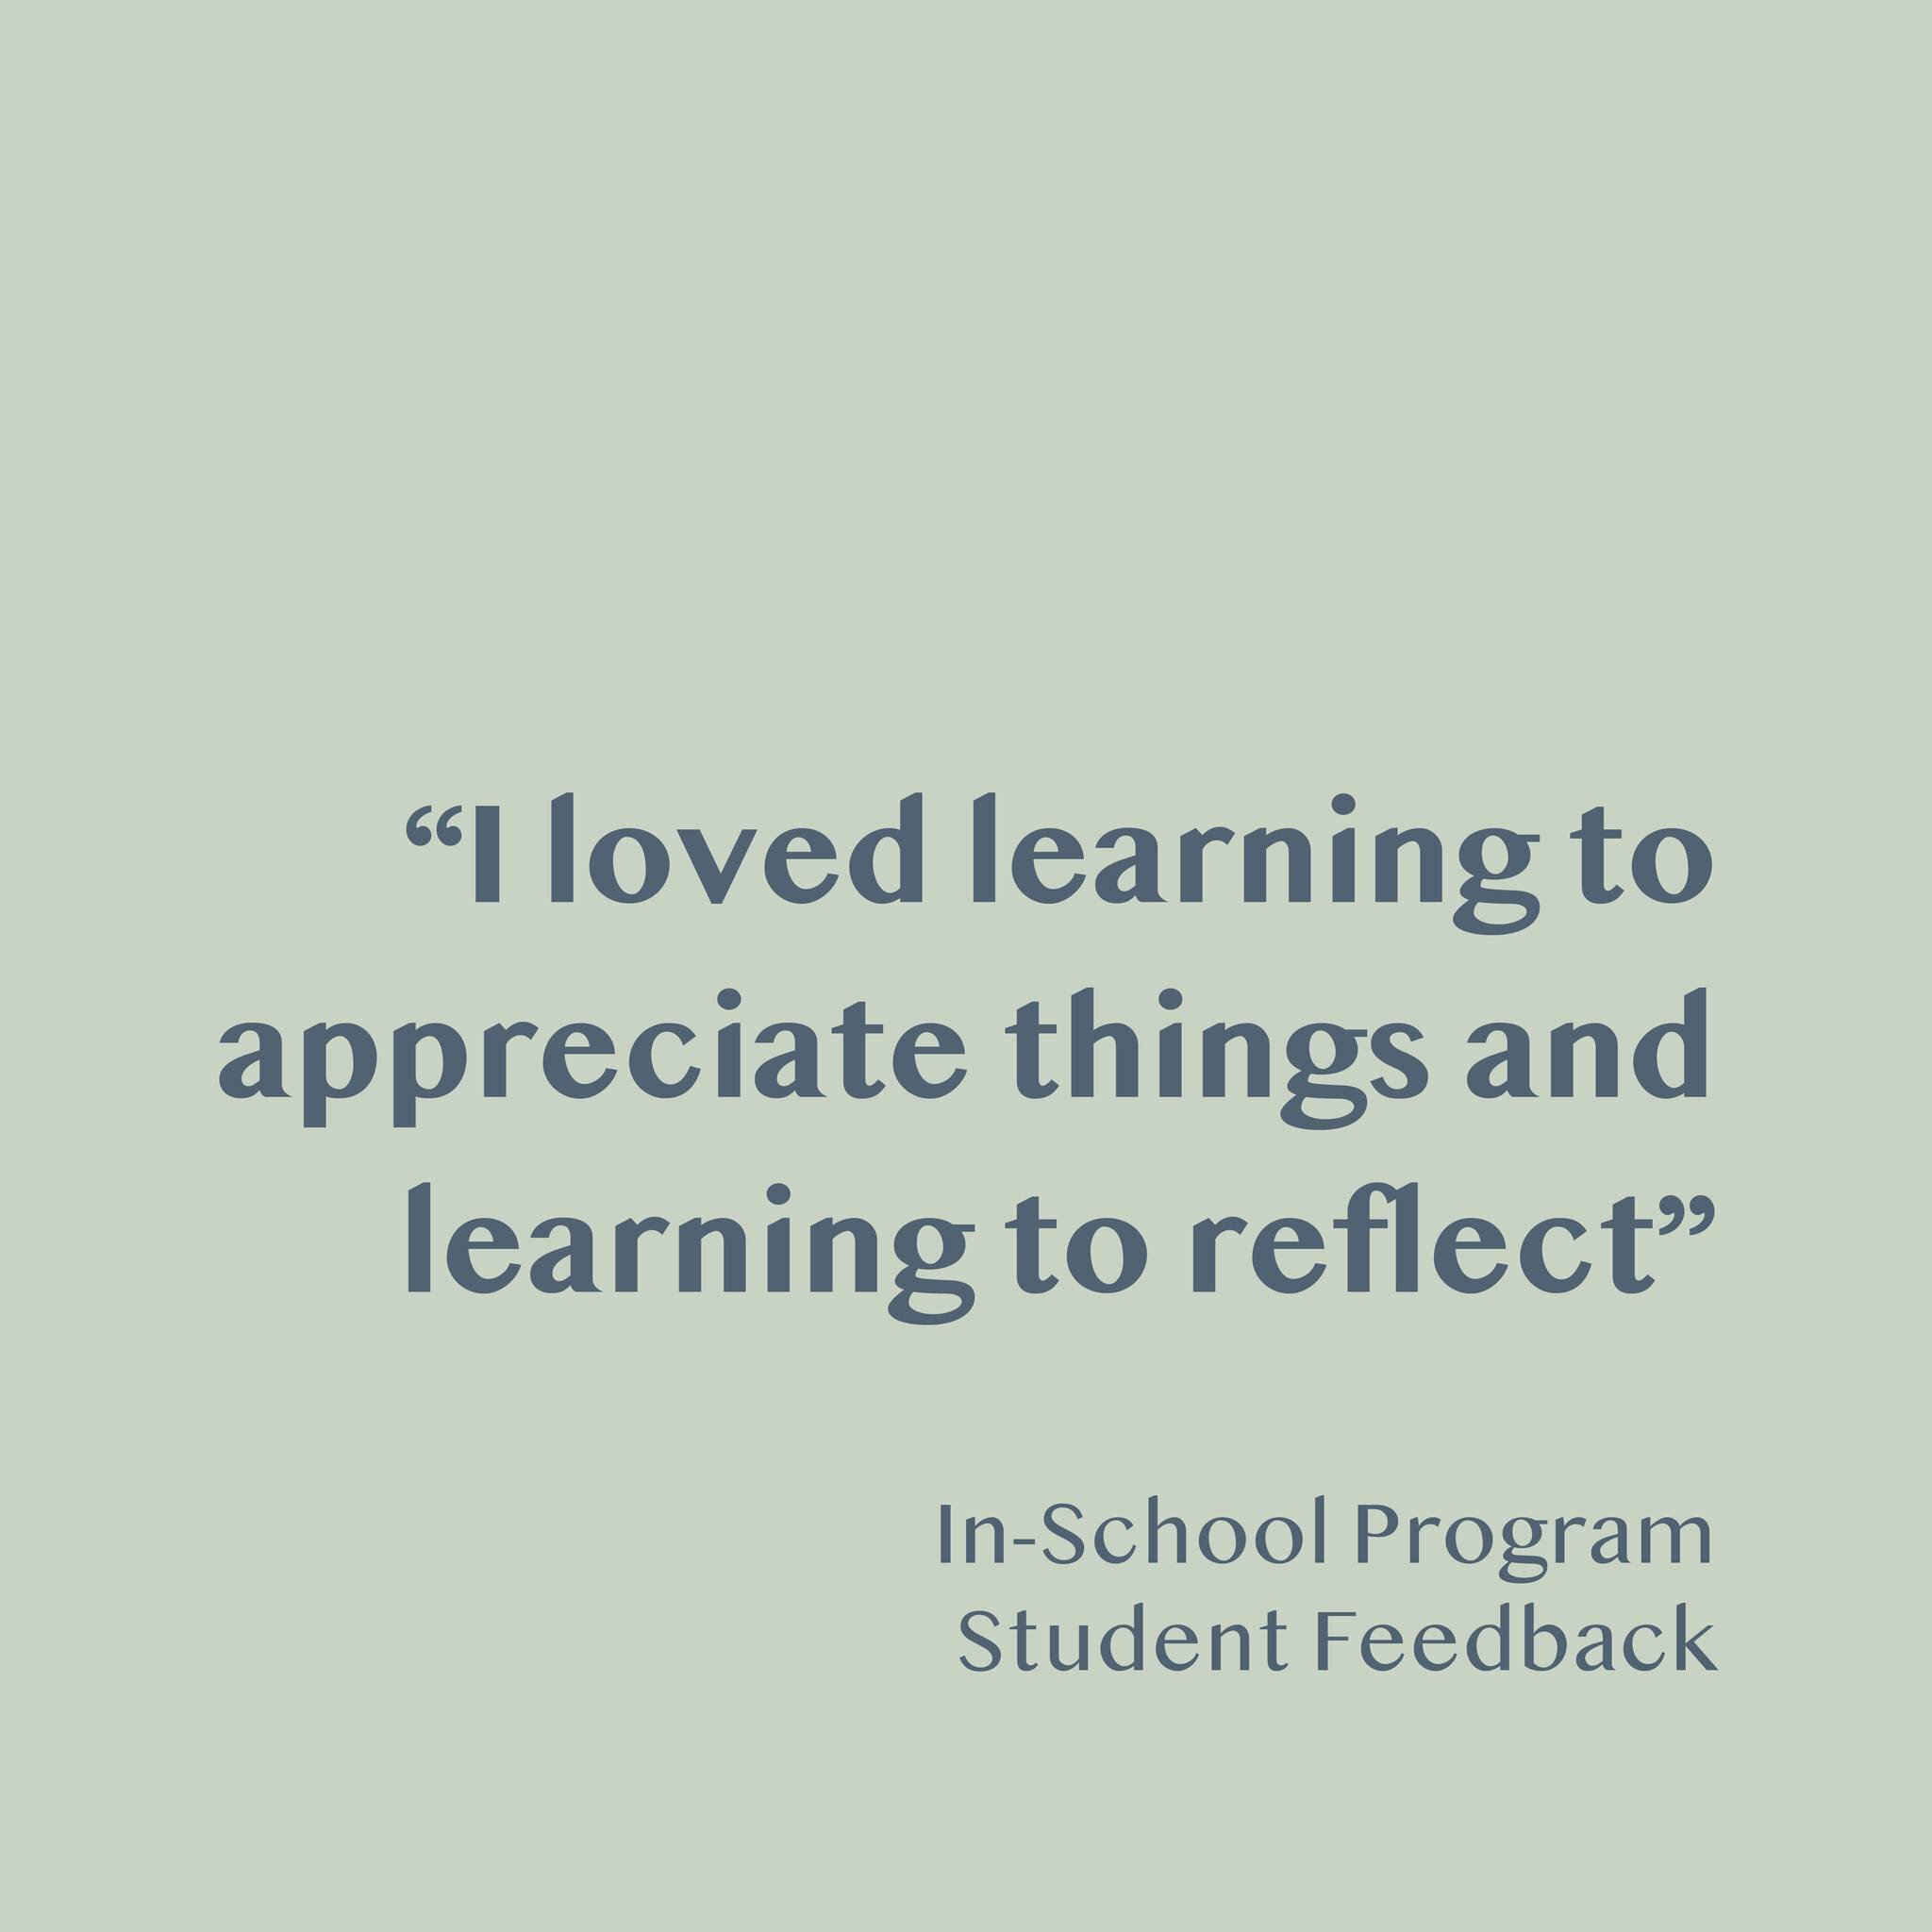 Hearing students benefit from our In-School Program is truly rewarding. Our In-School Program provides students resources and strategies towards dealing with everything life throws at us and how to lead a happy and healthy life. 

Head to our website